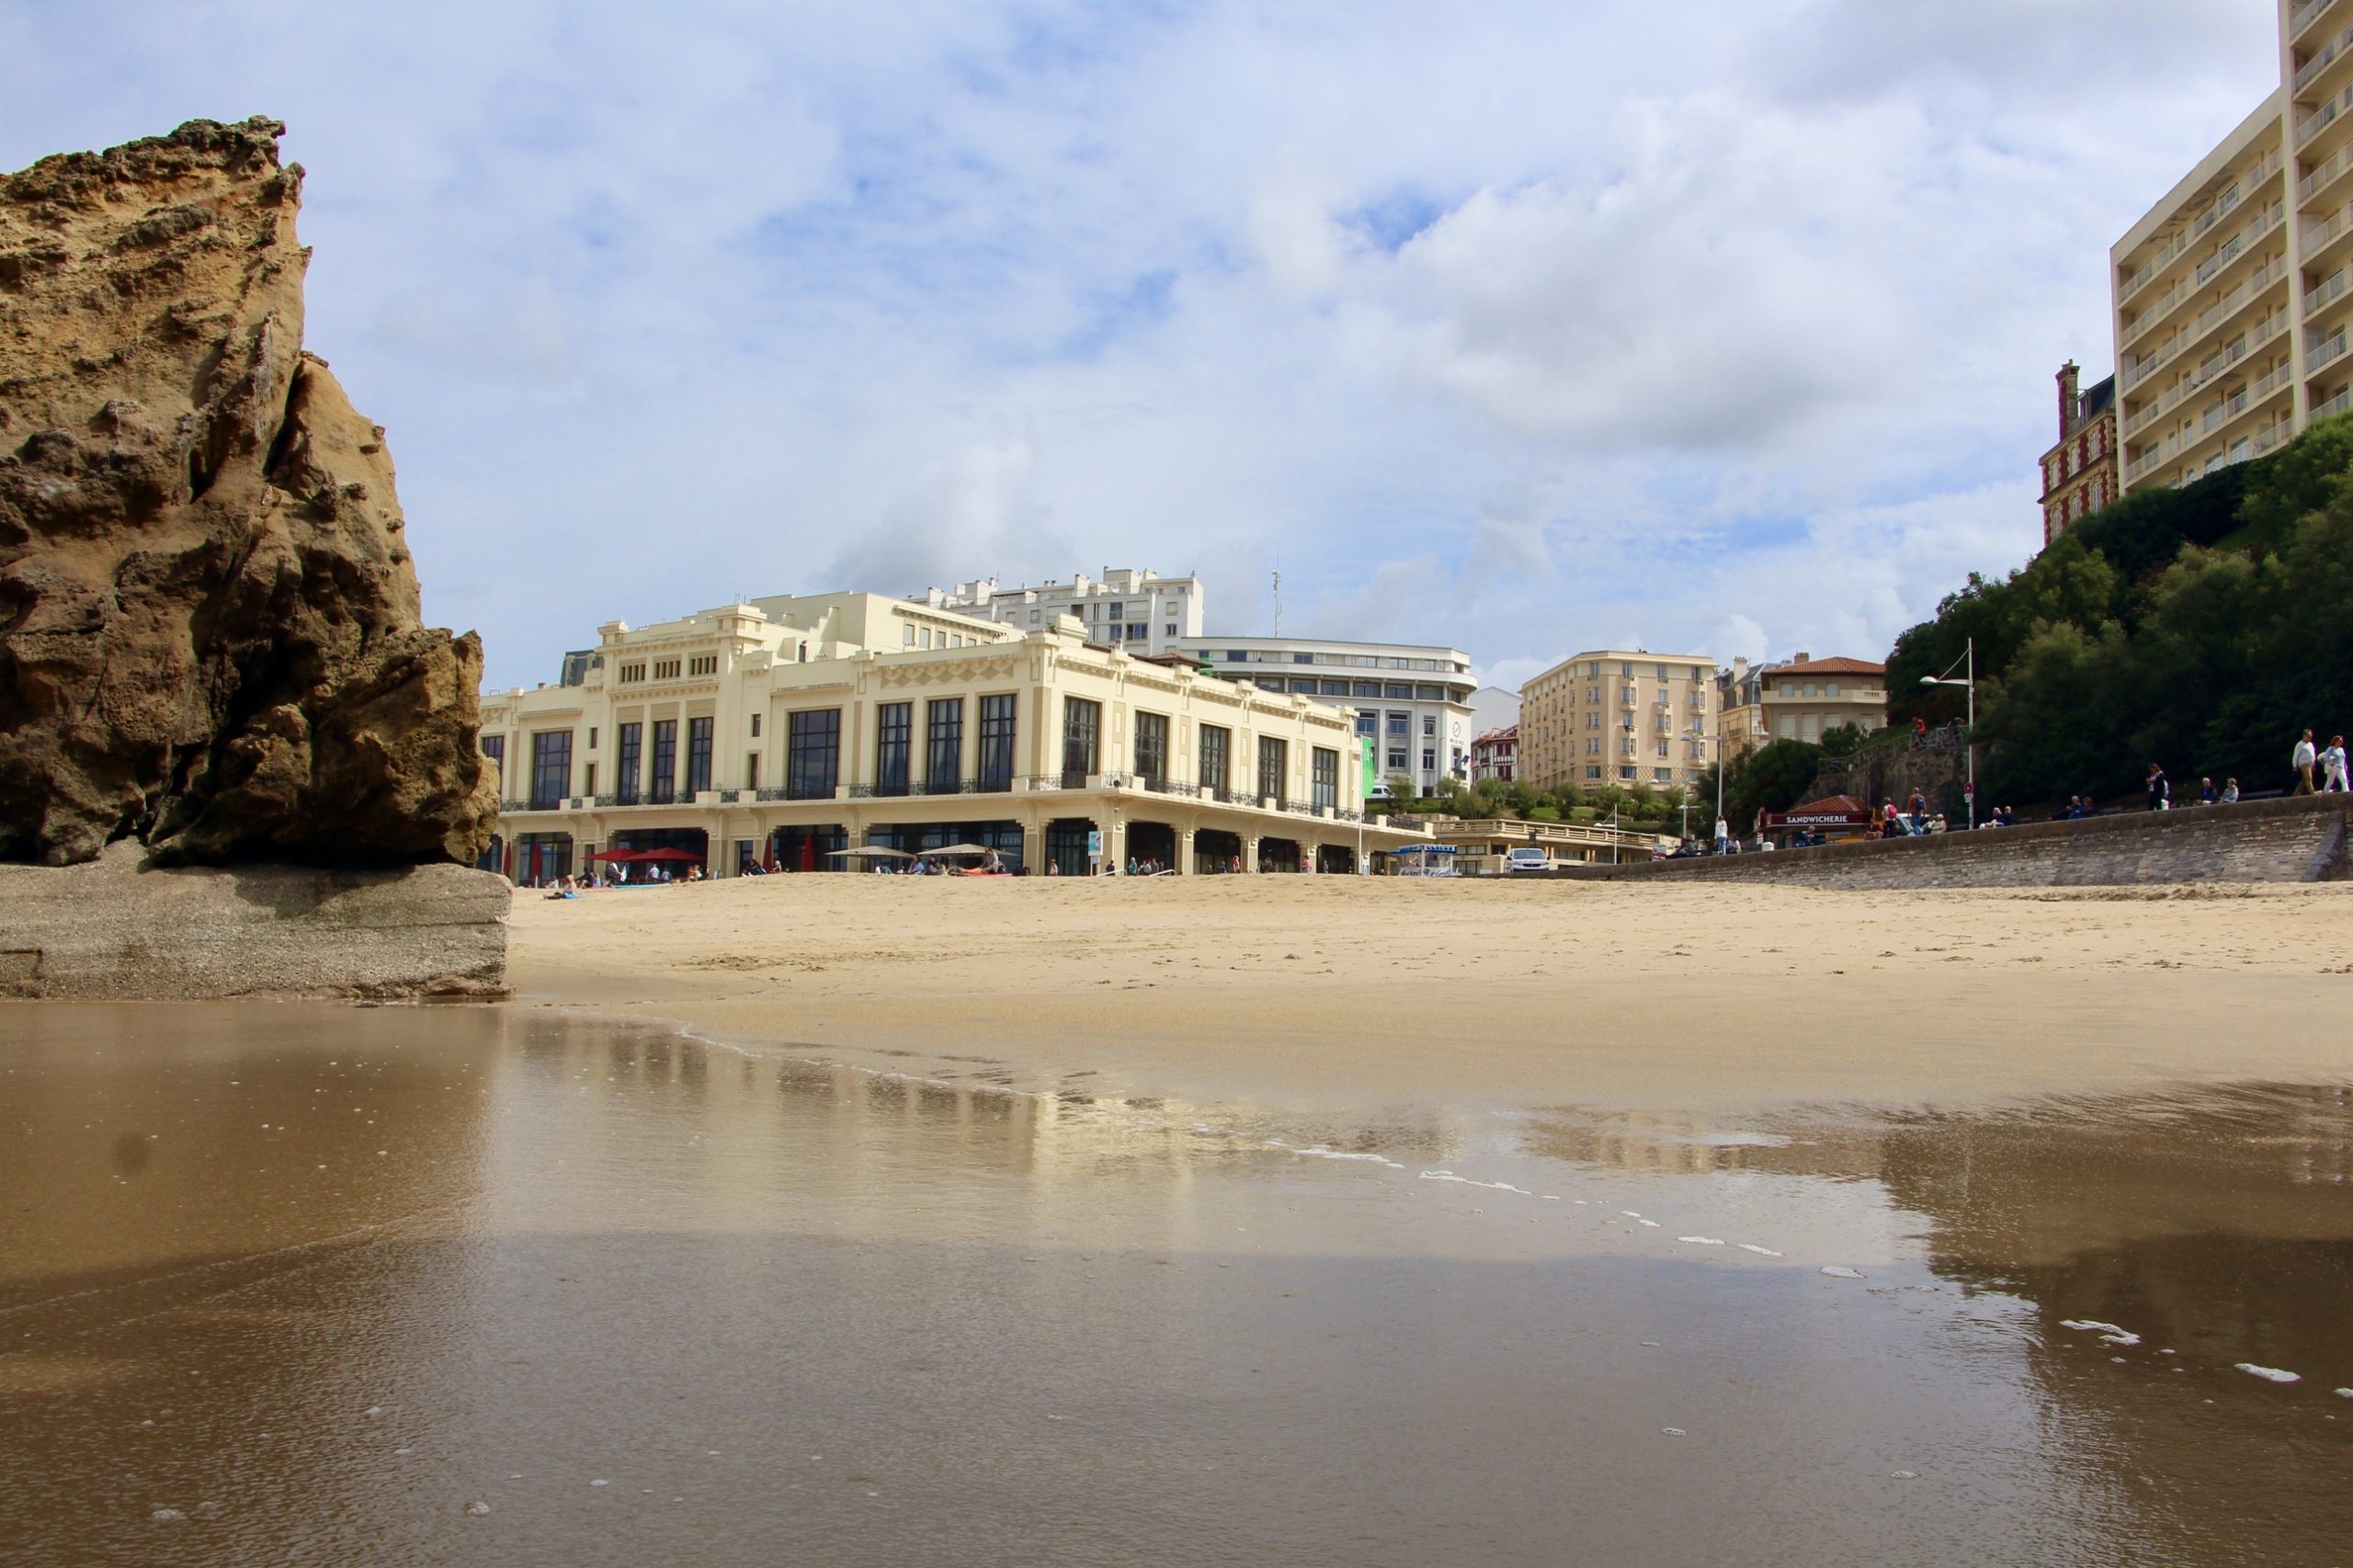 A view of the Casino Barrière in Biarritz, France.